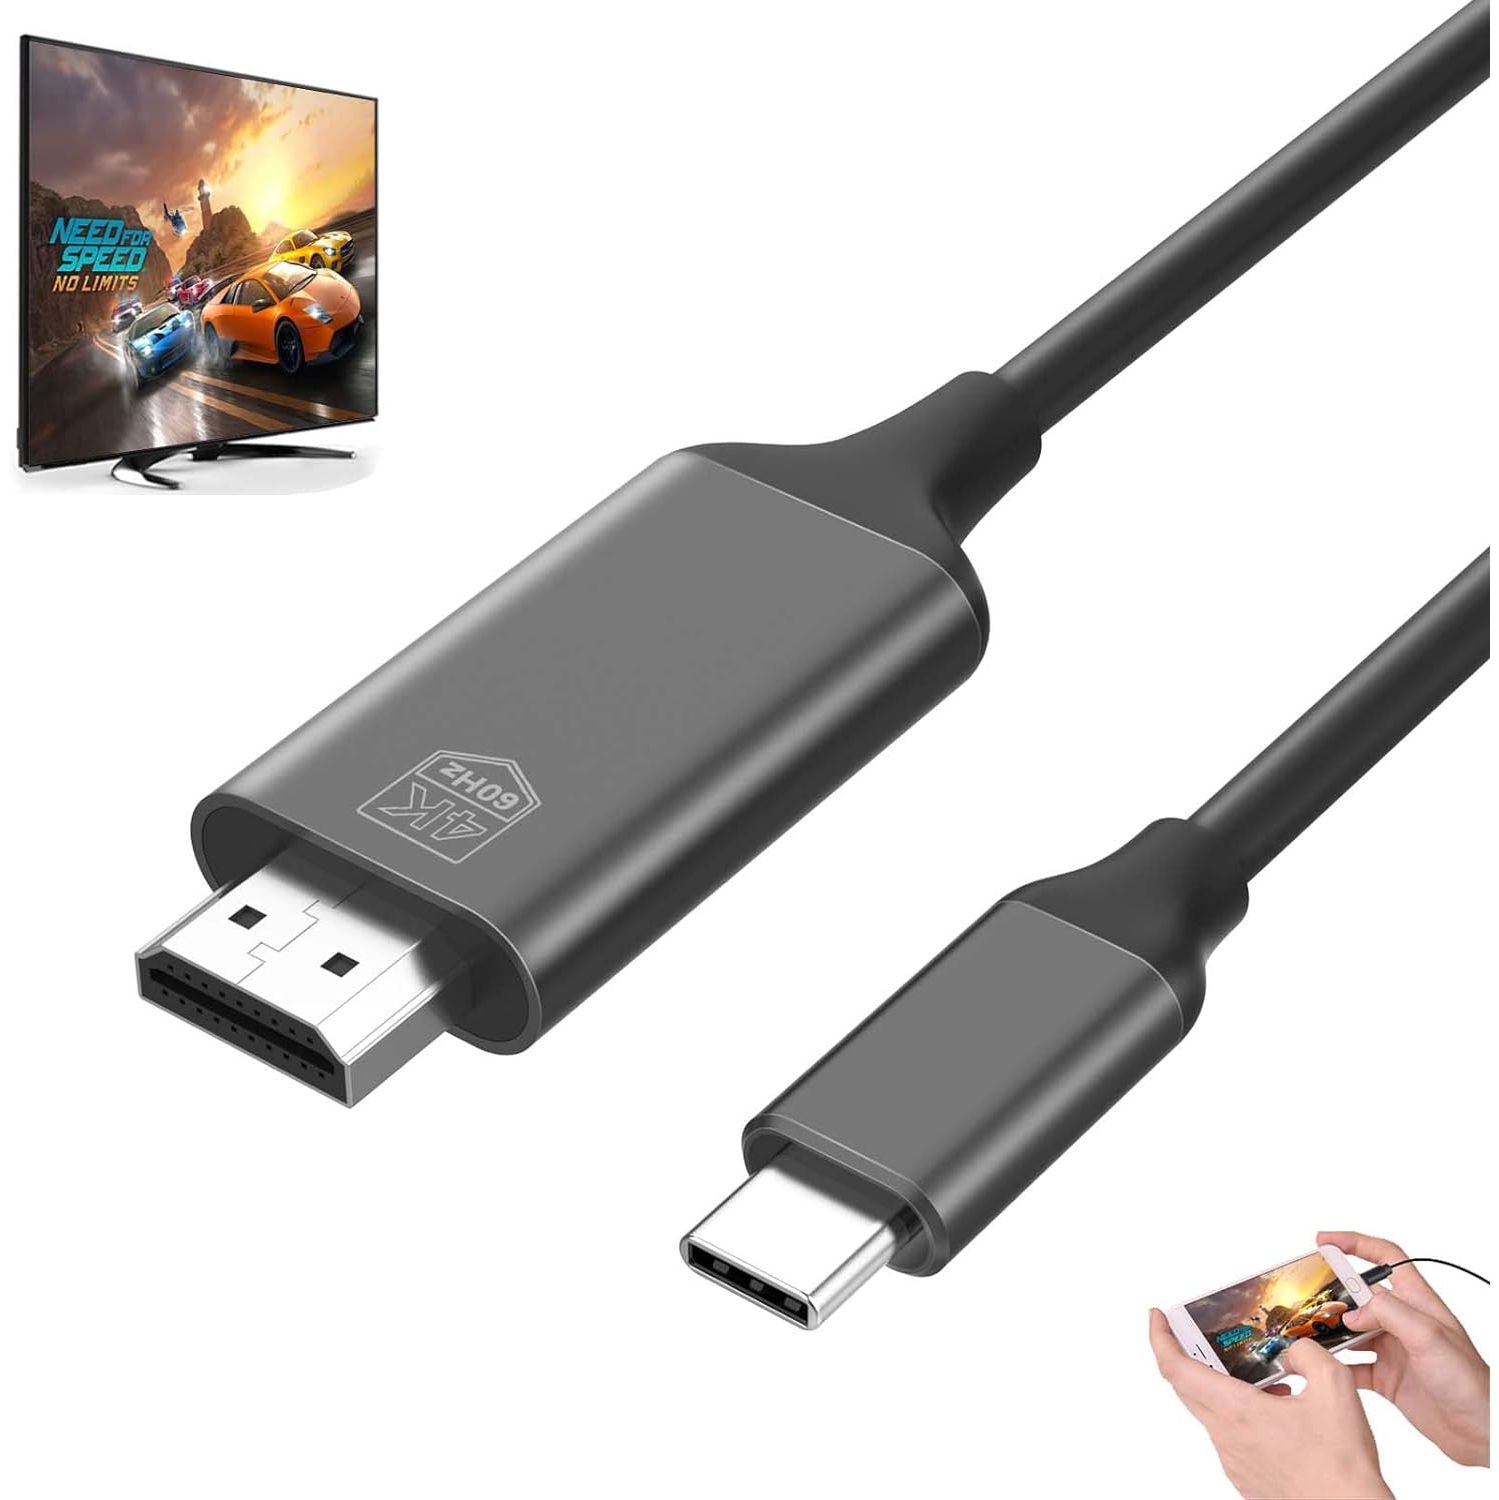 USB C to HDMI Adapter Cable - Thunderbolt 3/4 4K 60Hz MHL Cord for Dell HP Surface MacBook Pro Air Laptop Type C